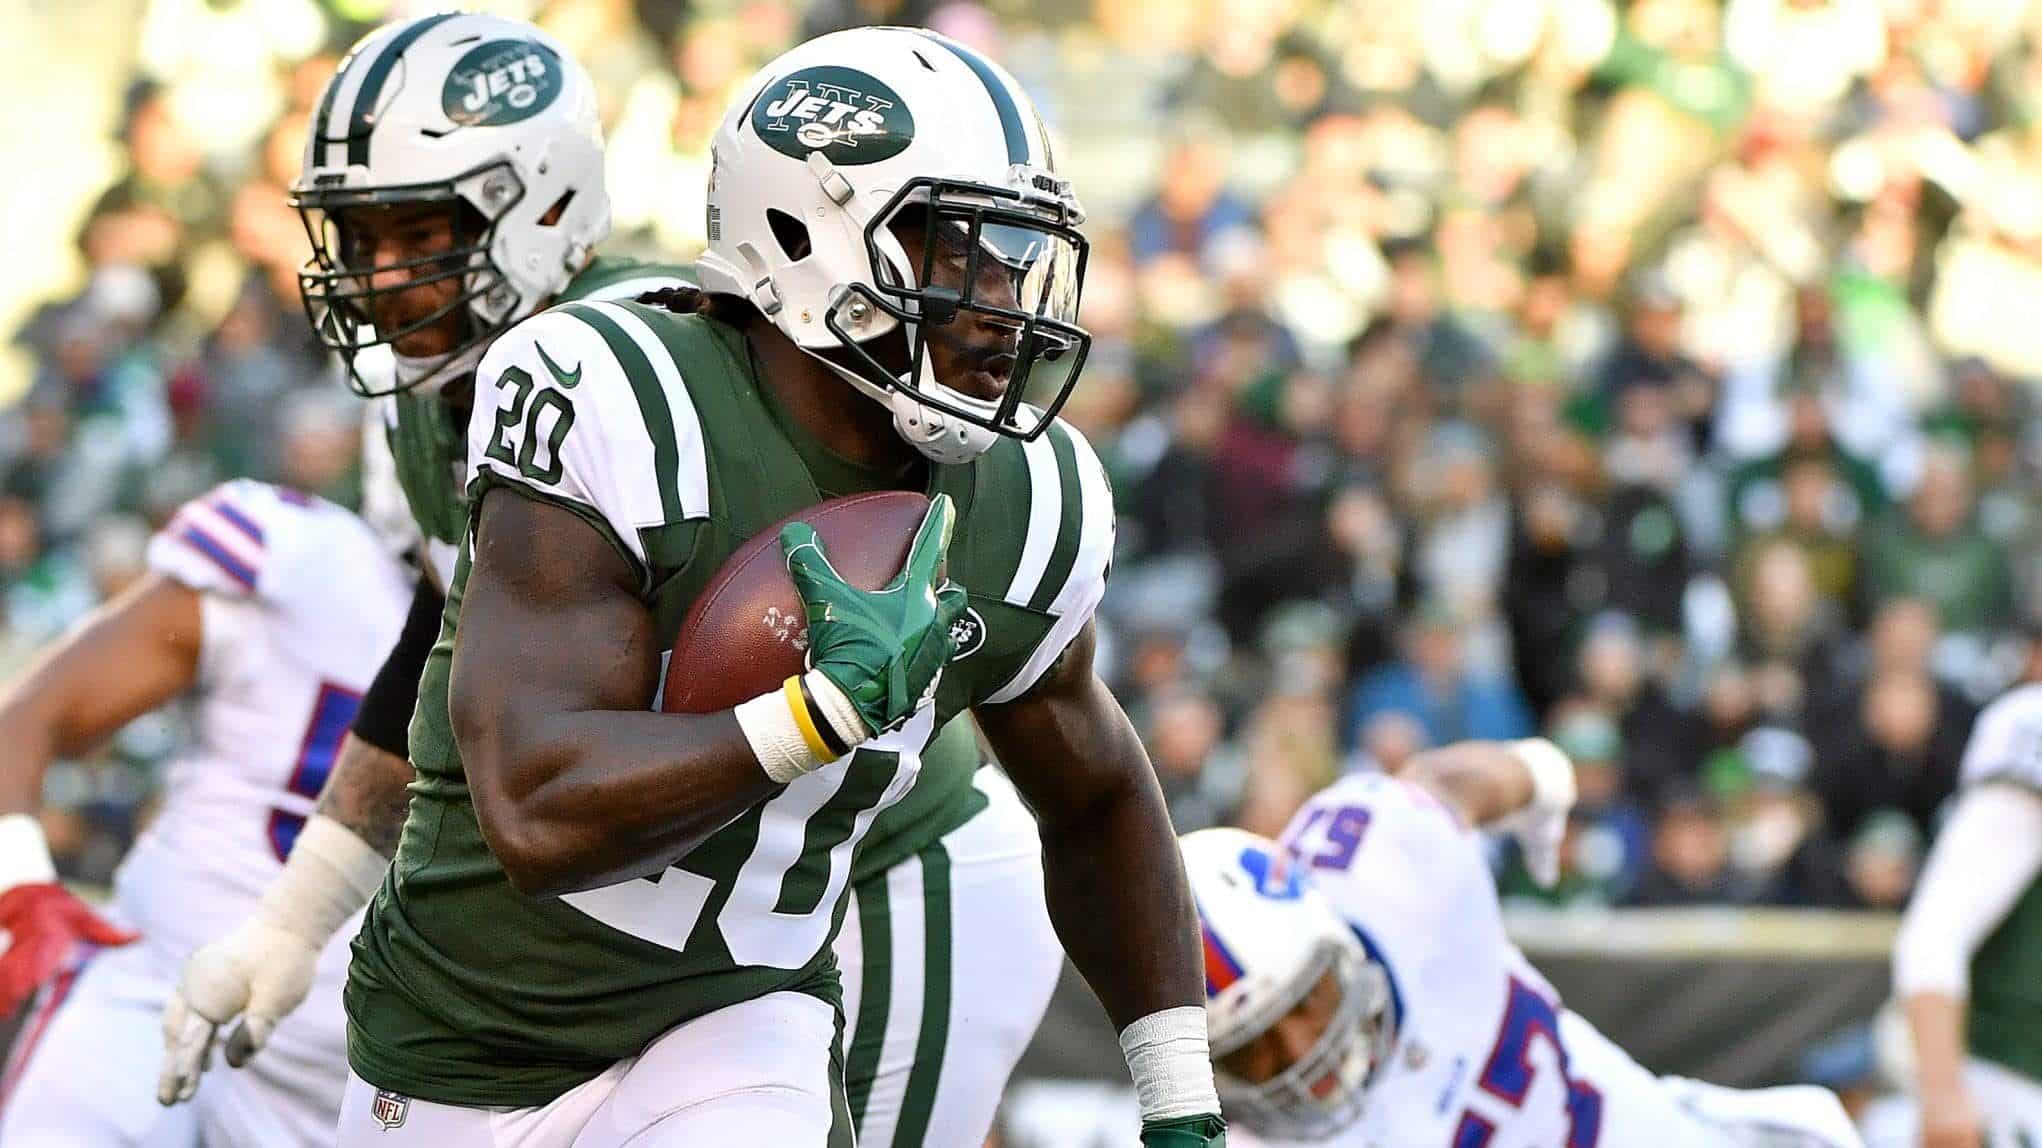 New York Jets Isaiah Crowell